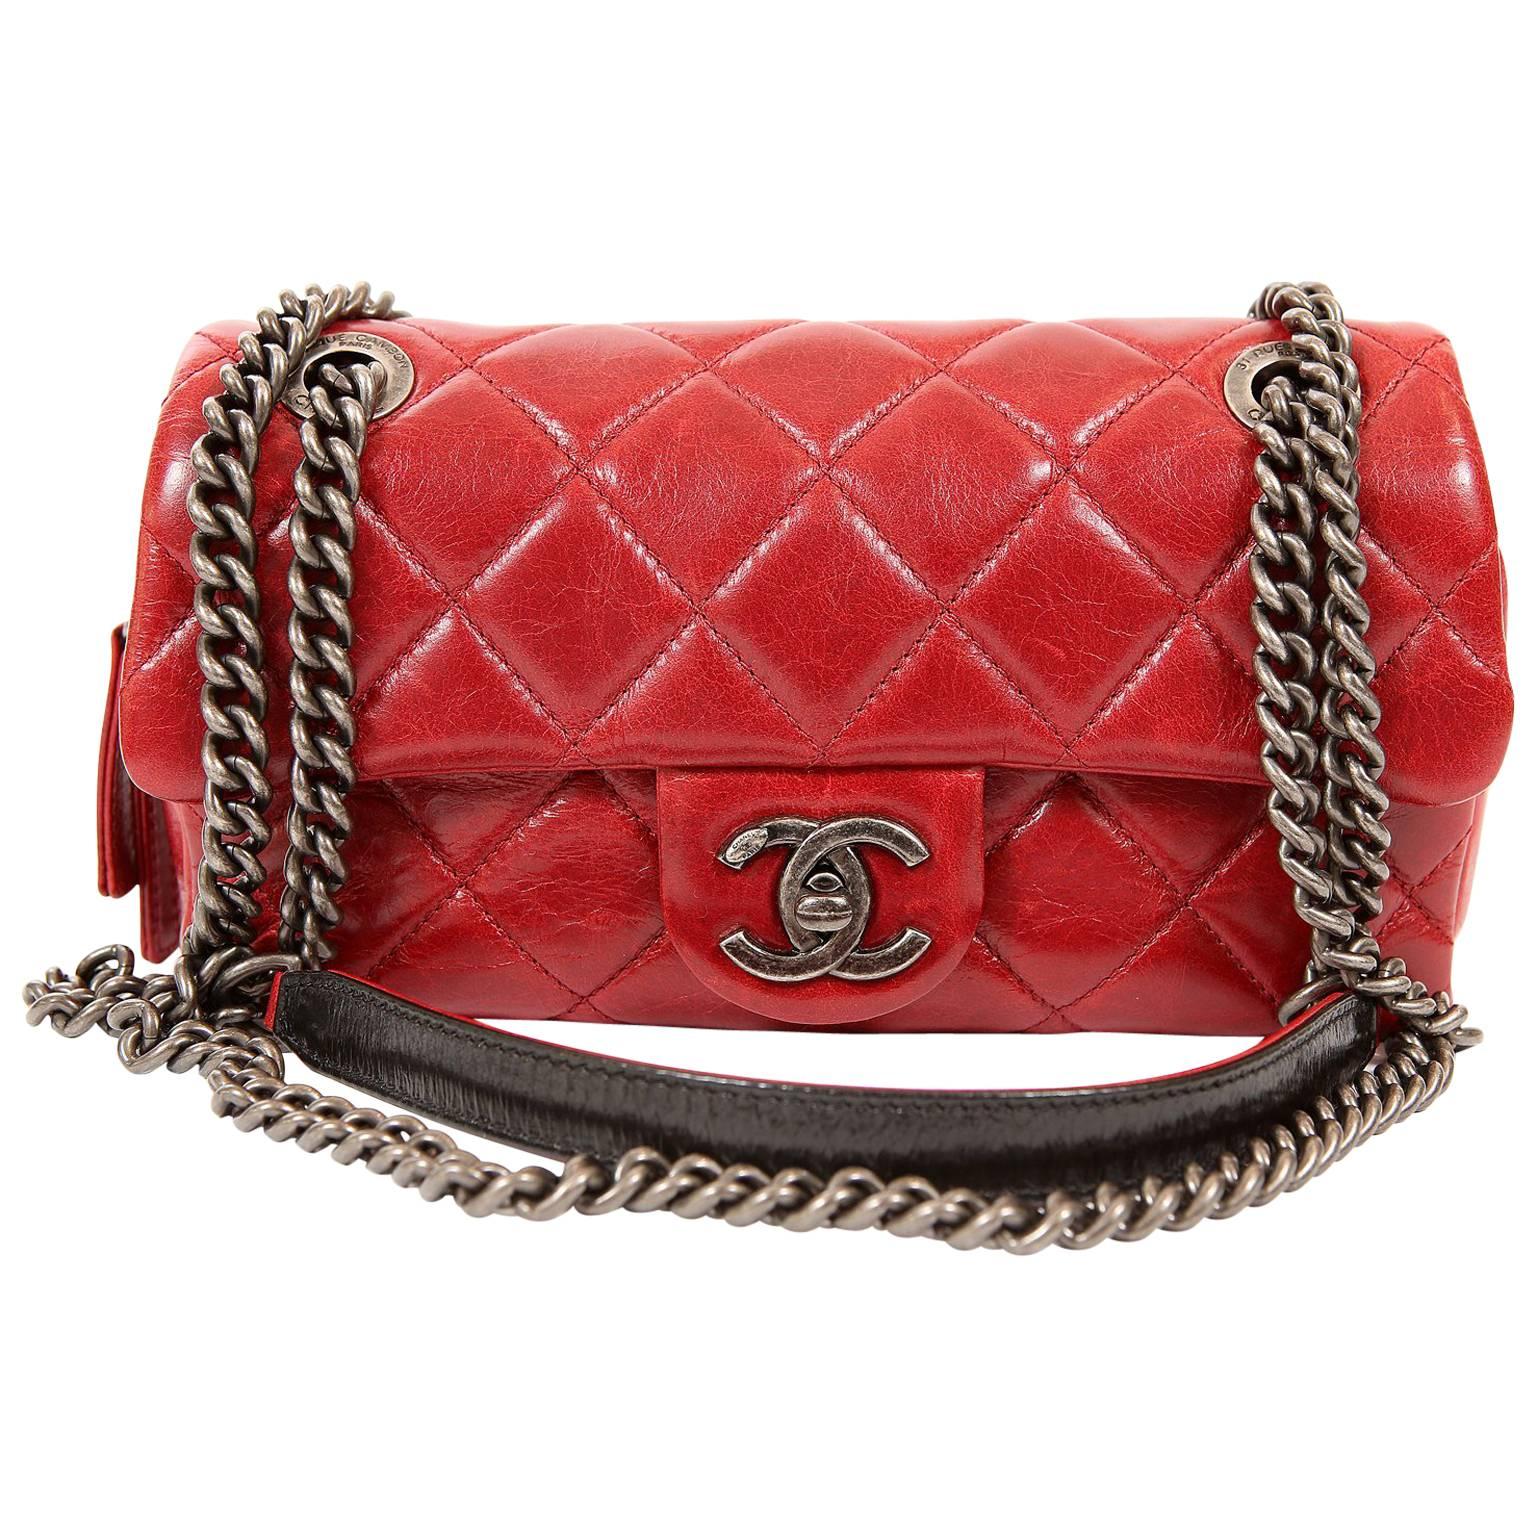 Chanel Red Distressed Leather Crossbody Bag